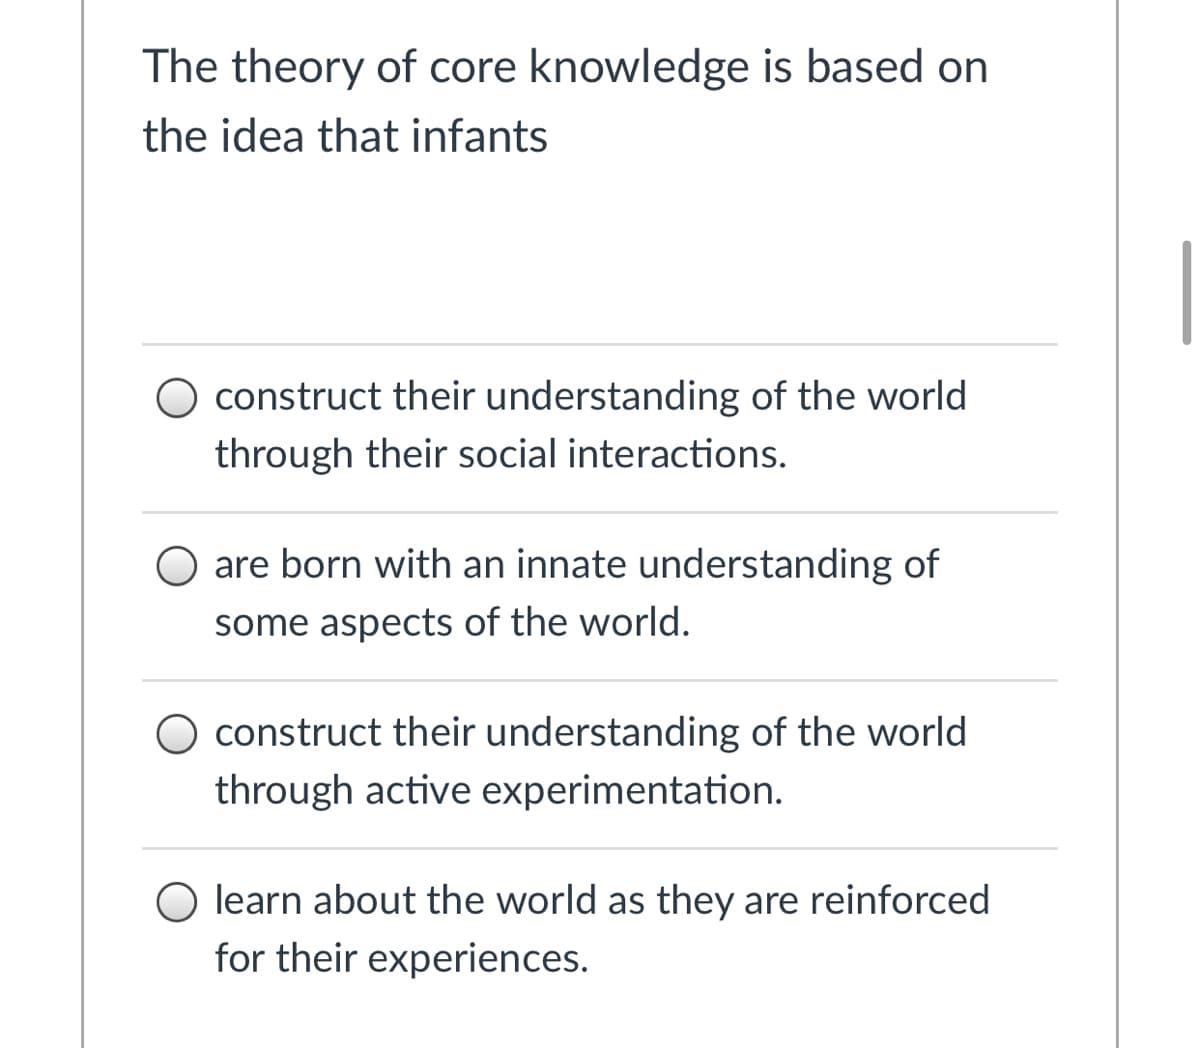 The theory of core knowledge is based on
the idea that infants
O construct their understanding of the world
through their social interactions.
O are born with an innate understanding of
some aspects of the world.
O construct their understanding of the world
through active experimentation.
O learn about the world as they are reinforced
for their experiences.
